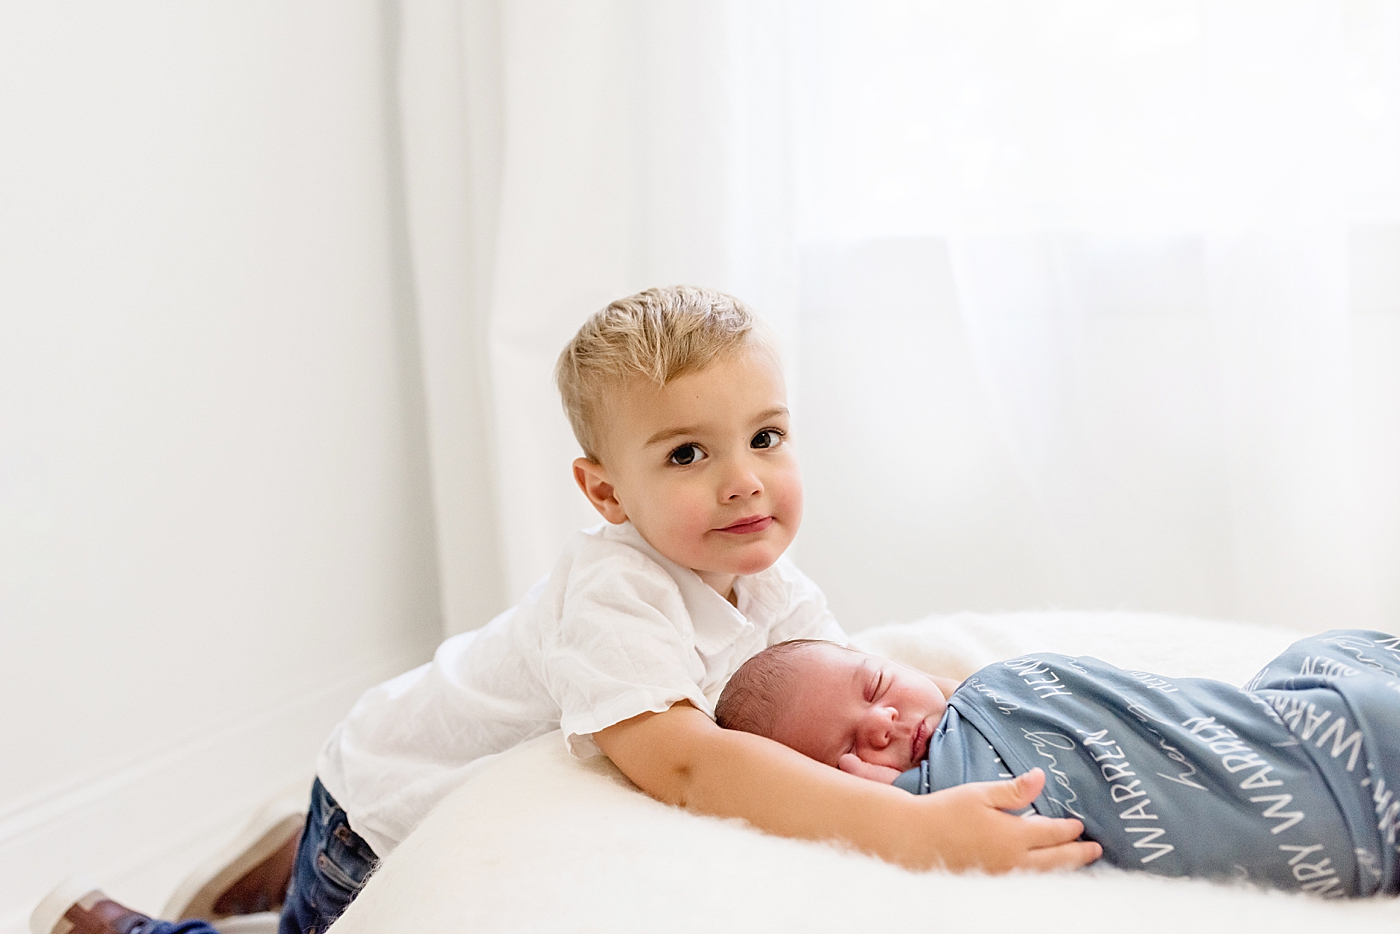 New big brother snuggling his new baby | Photo by Anna Wisjo Photography